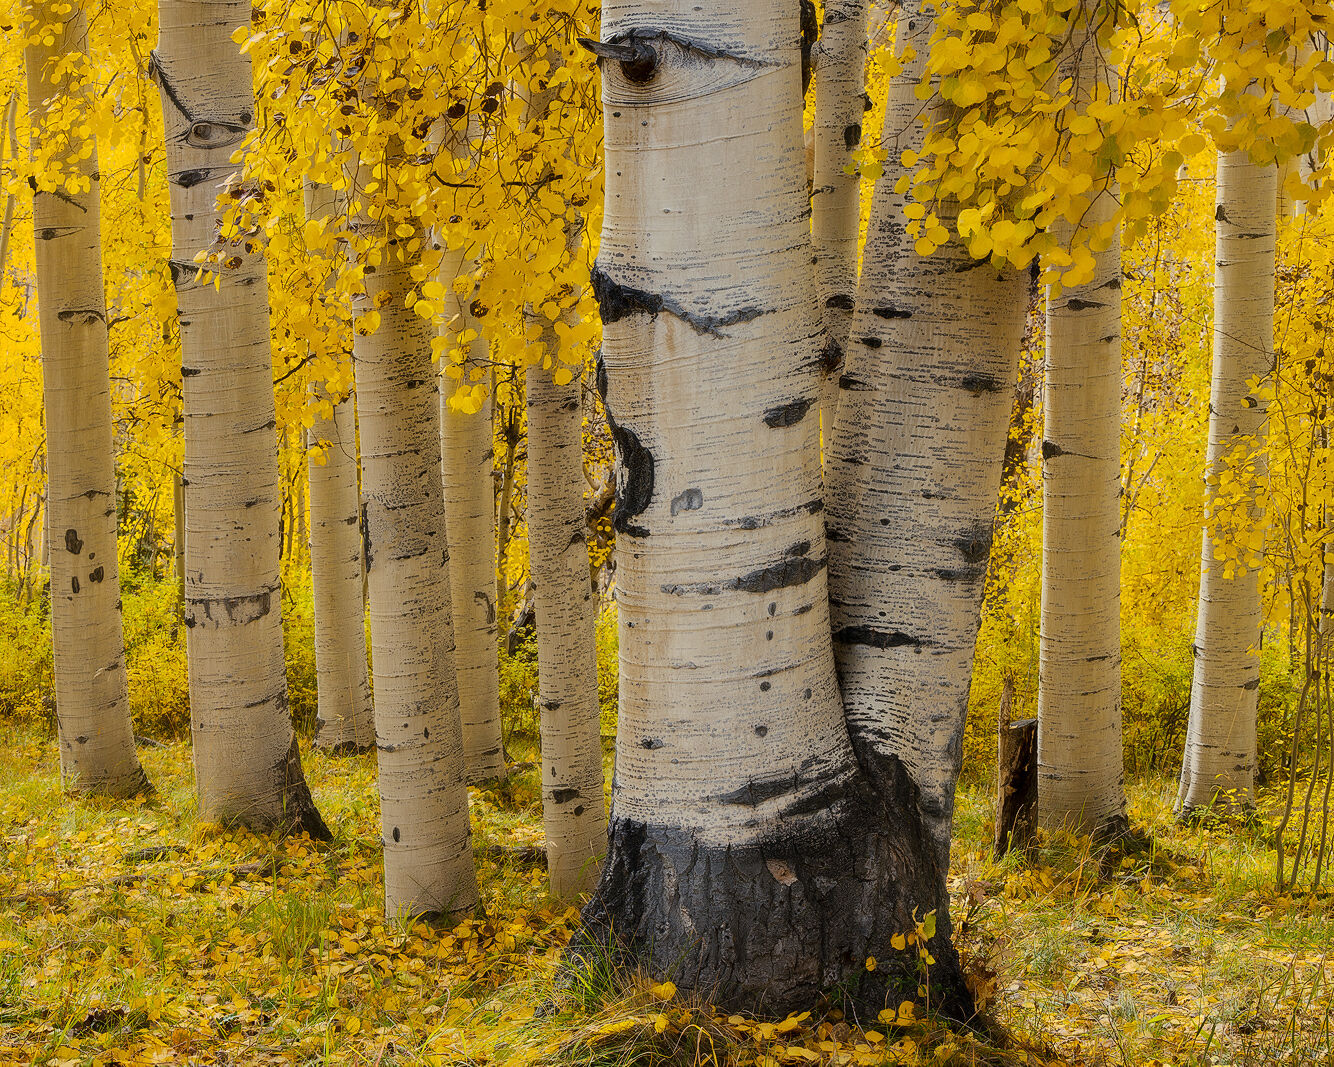 Large, double trunk aspen tree stands in front of smaller aspen trees with yellow leaves surrounding the entire scene.